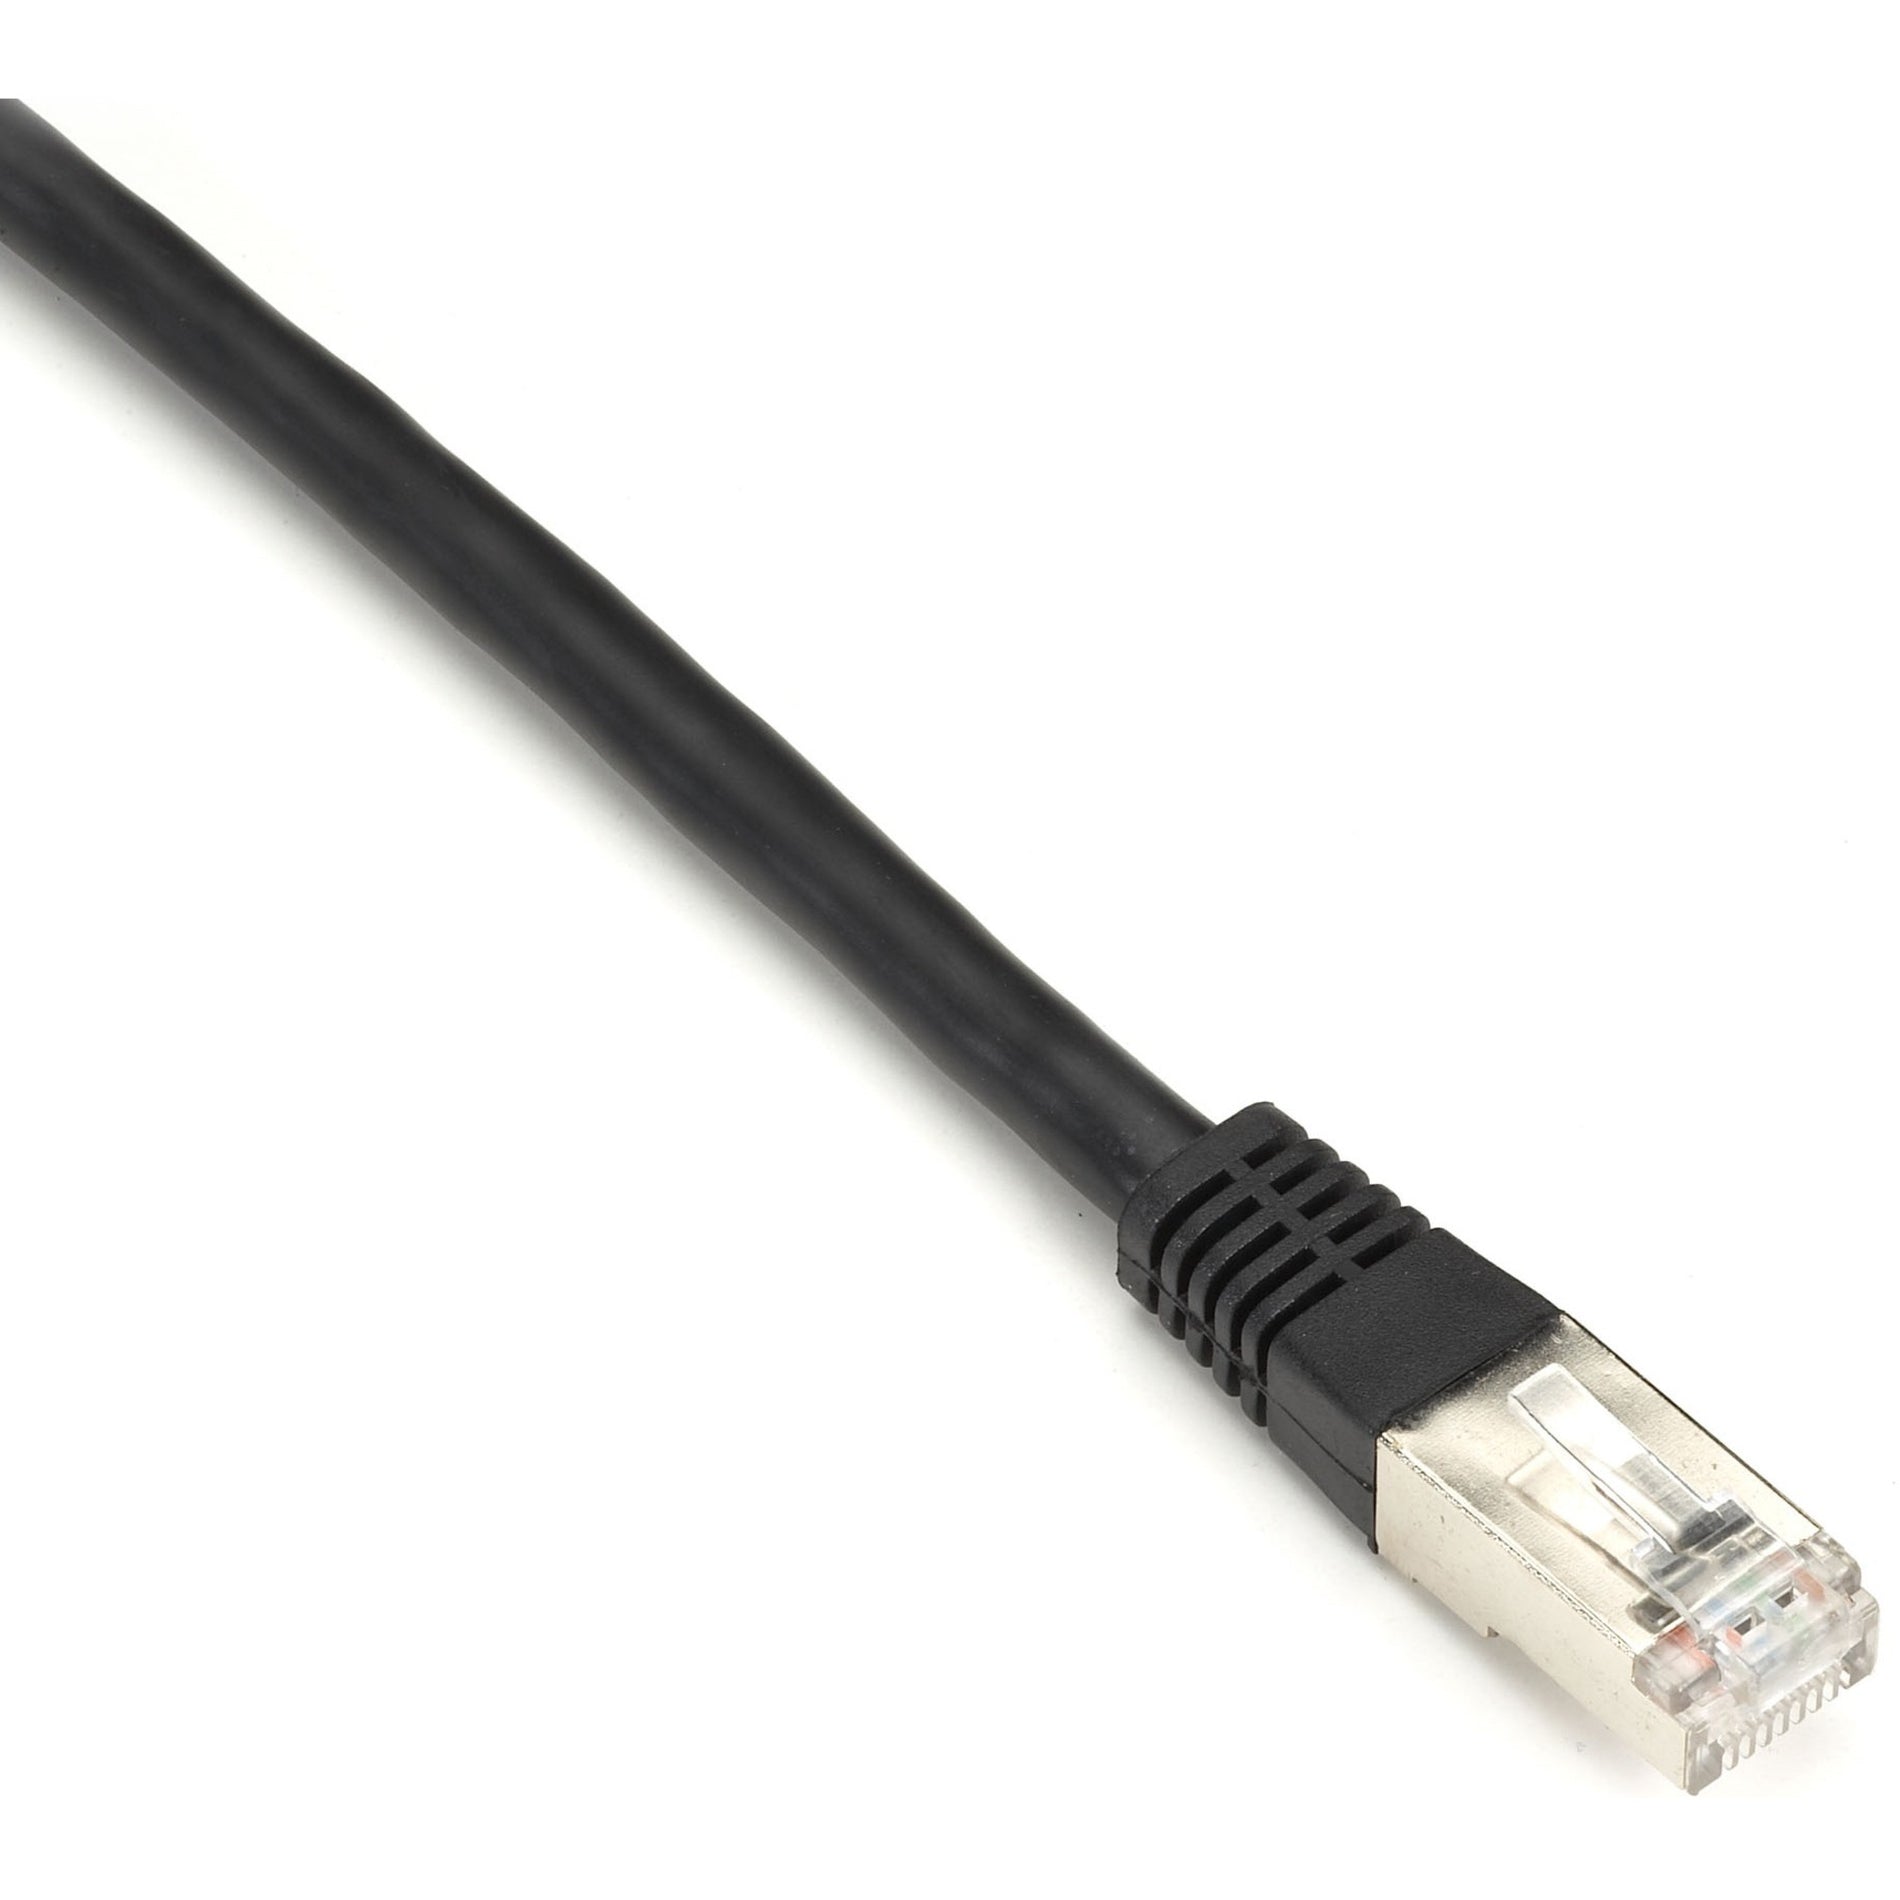 Black Box EVNSL0272BK-0001 SlimLine Cat.6 (S/FTP) Patch Network Cable, 1 ft, EMI/RF Protection, 1 Gbit/s Data Transfer Rate